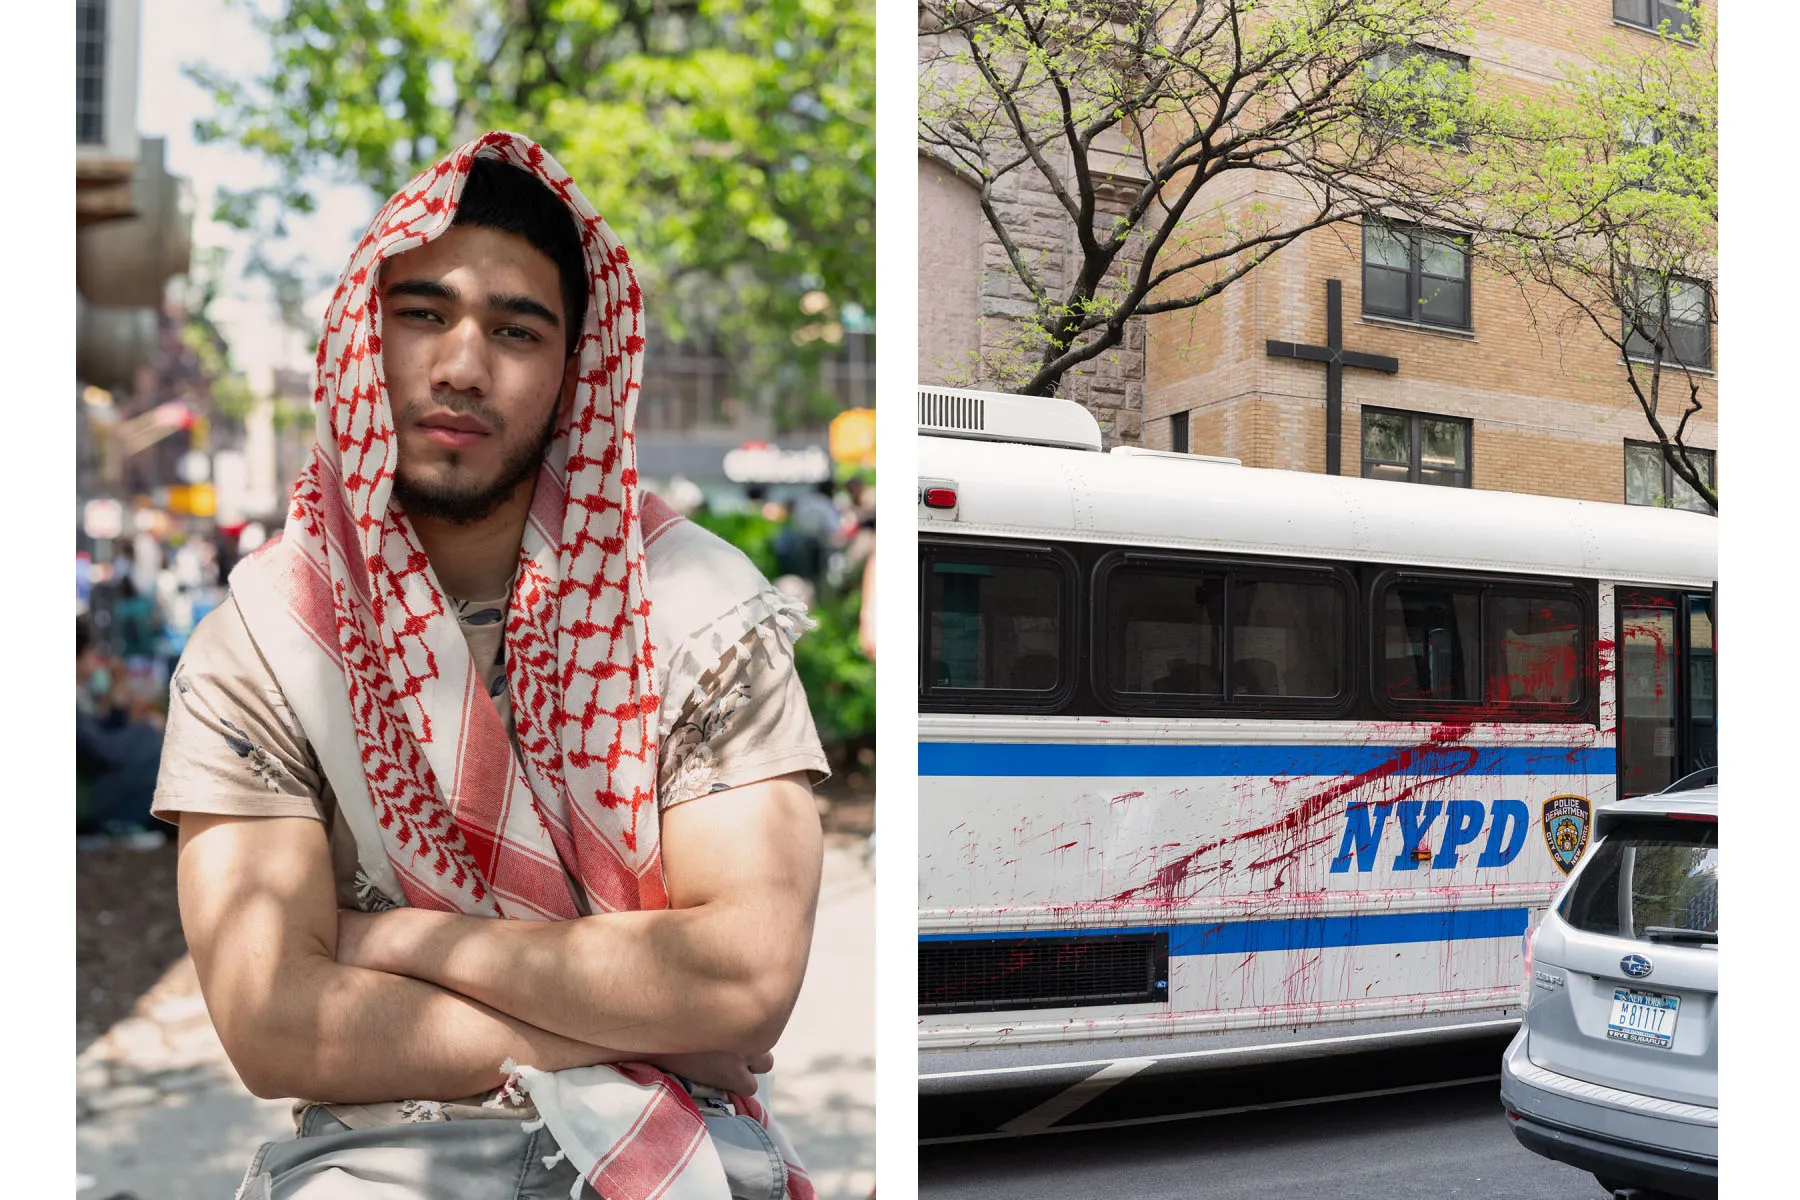 left: A student poses for a portrait at a meeting place for protesters in Chinatown. right: An NYPD bus is splattered in blood-like red paint.